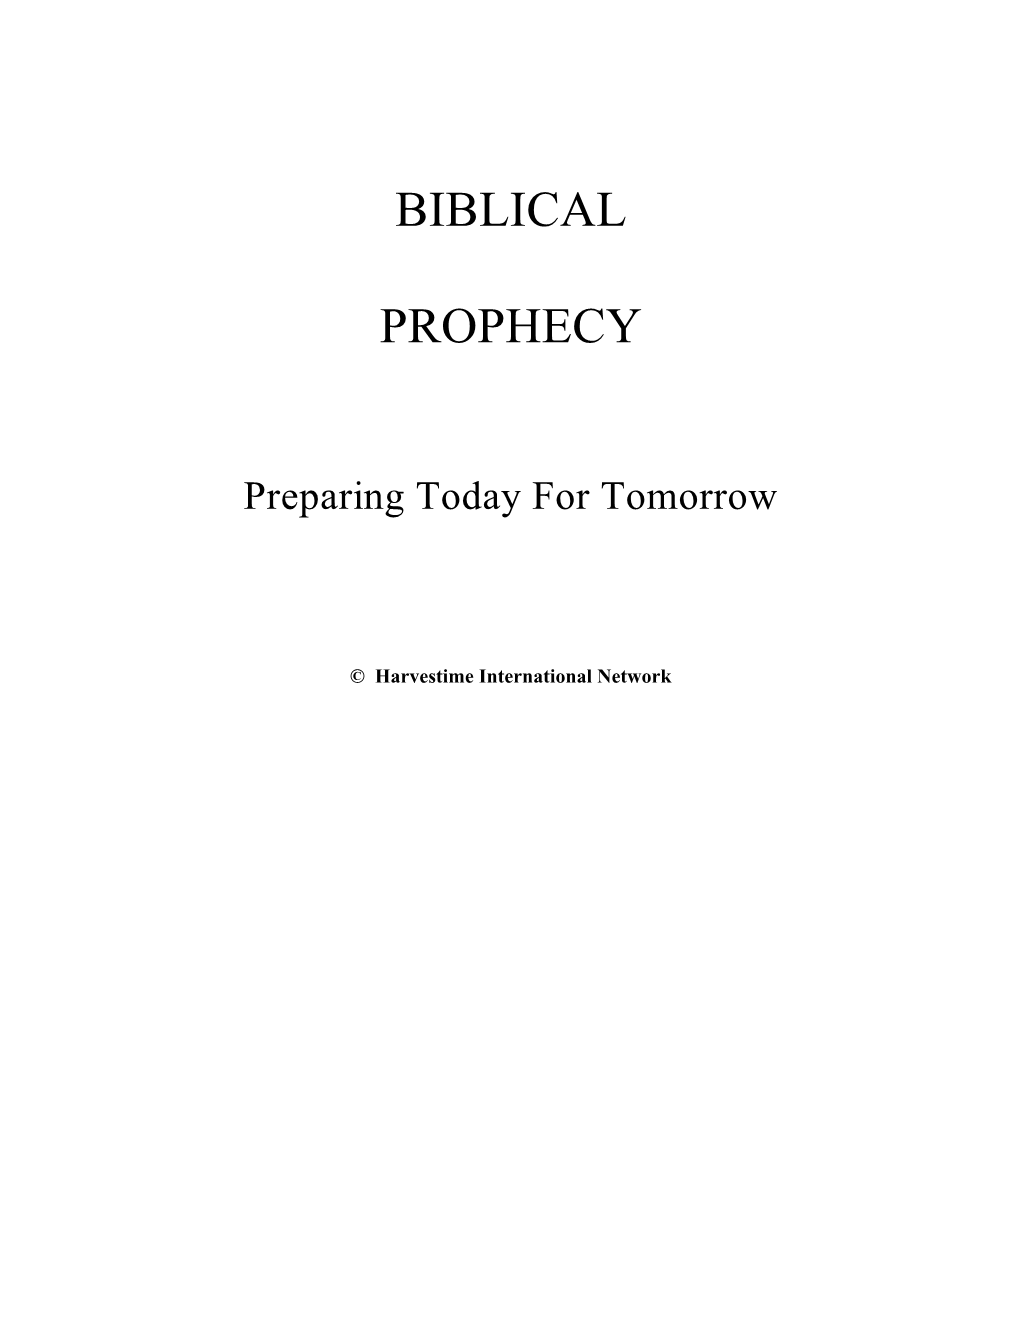 Biblical Prophecy I Course Objectives Ii